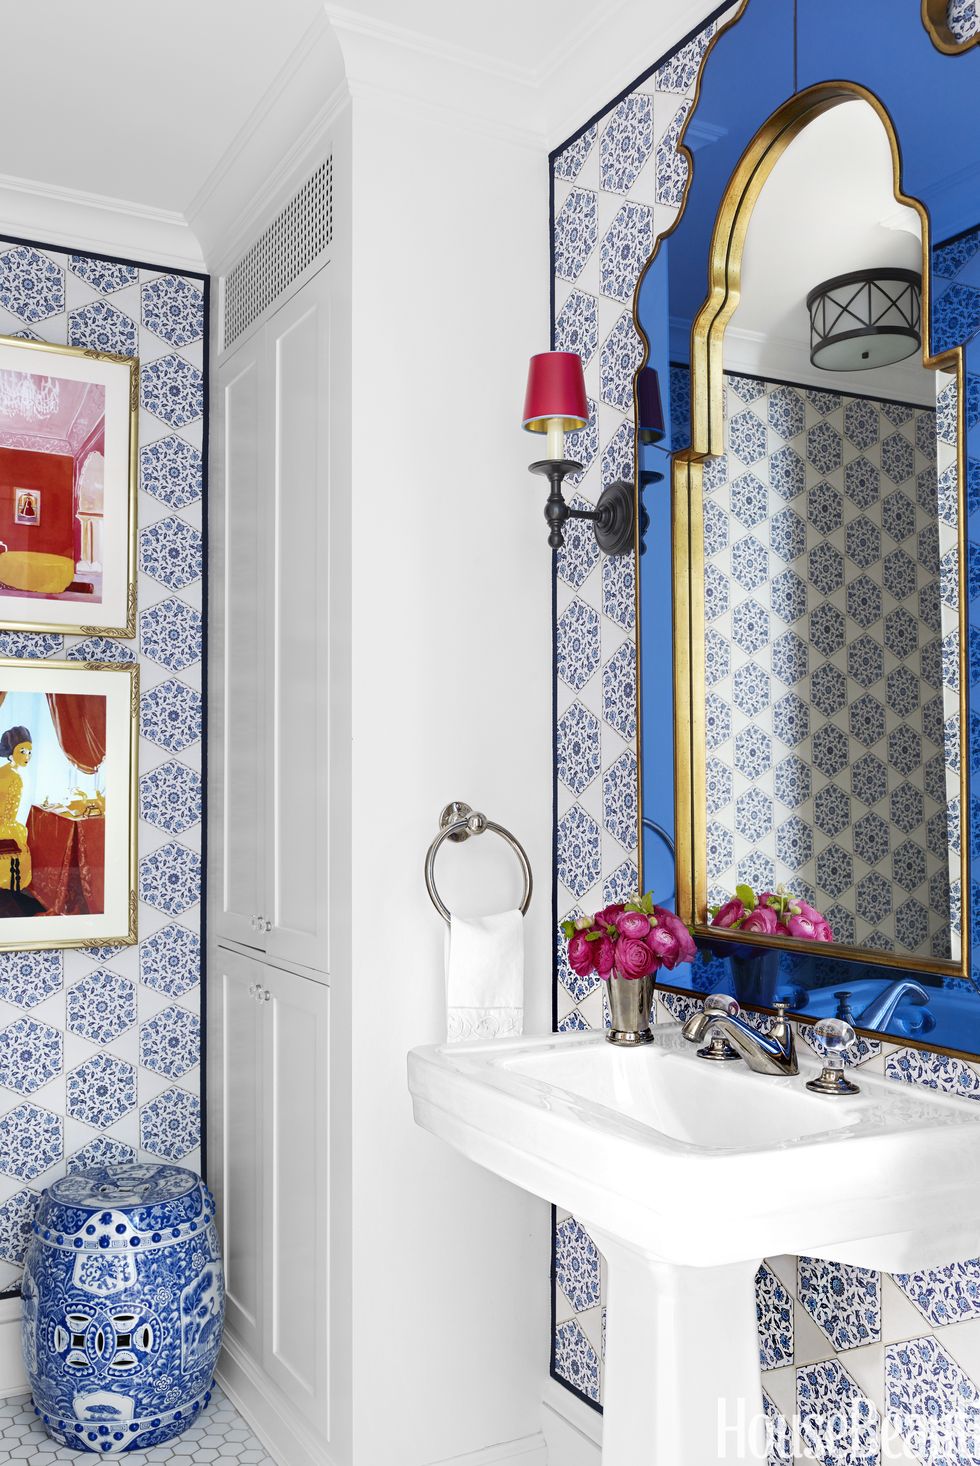 12 Ideas for Organizing in the Bathroom - Blue i Style